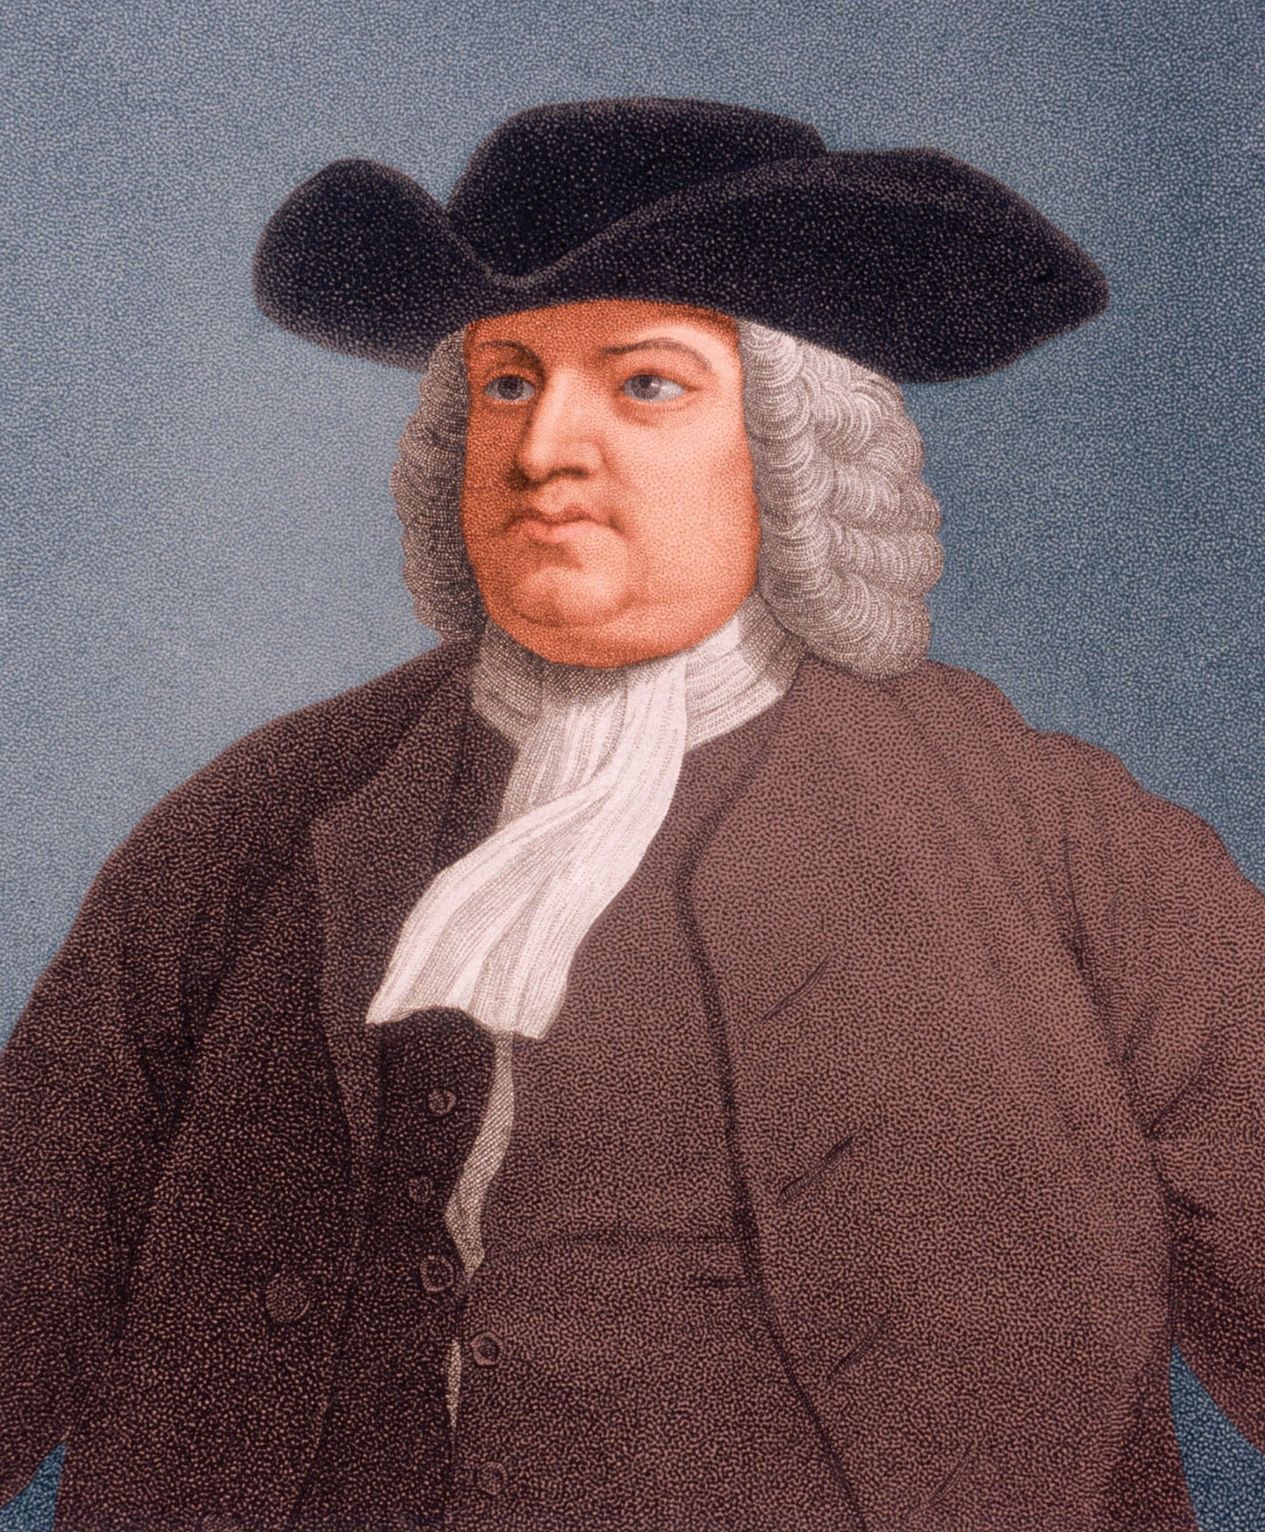 William Penn Founder of Pennsylvania "[I]t is impossible that any